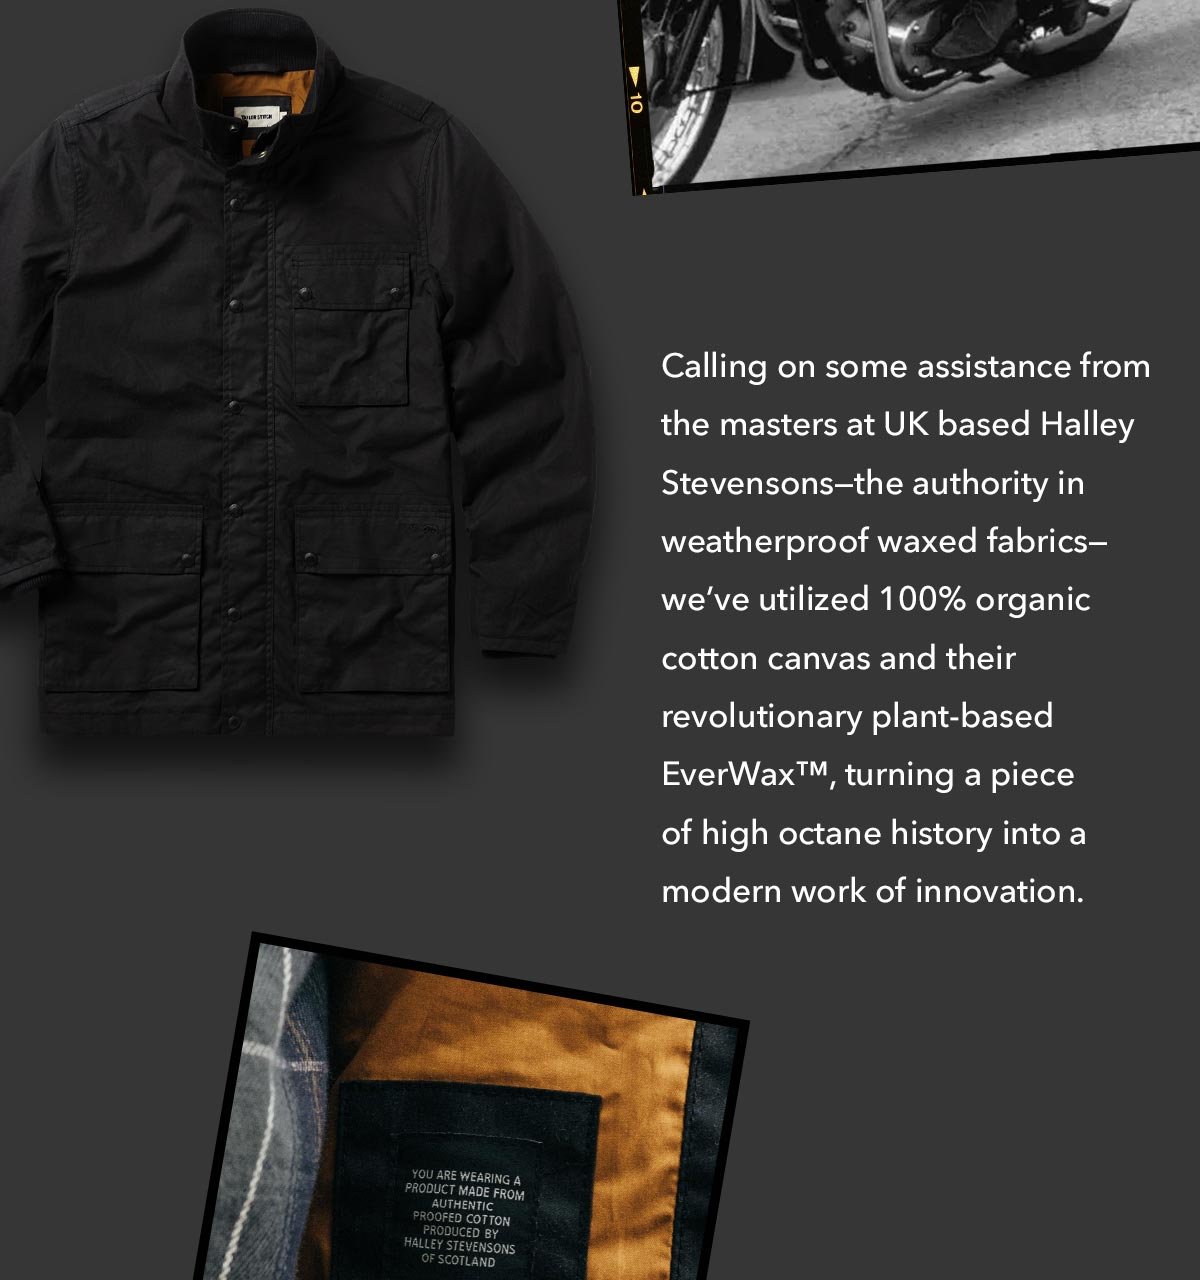 Calling on some assistance from our UK based Halley Stevensons—the authority in weatherproof waxed fabrics— we’ve utilized 100% organic cotton canvas and their revolutionary plant-based EverWax™, turning a piece of high octane history into a modern work of innovation.